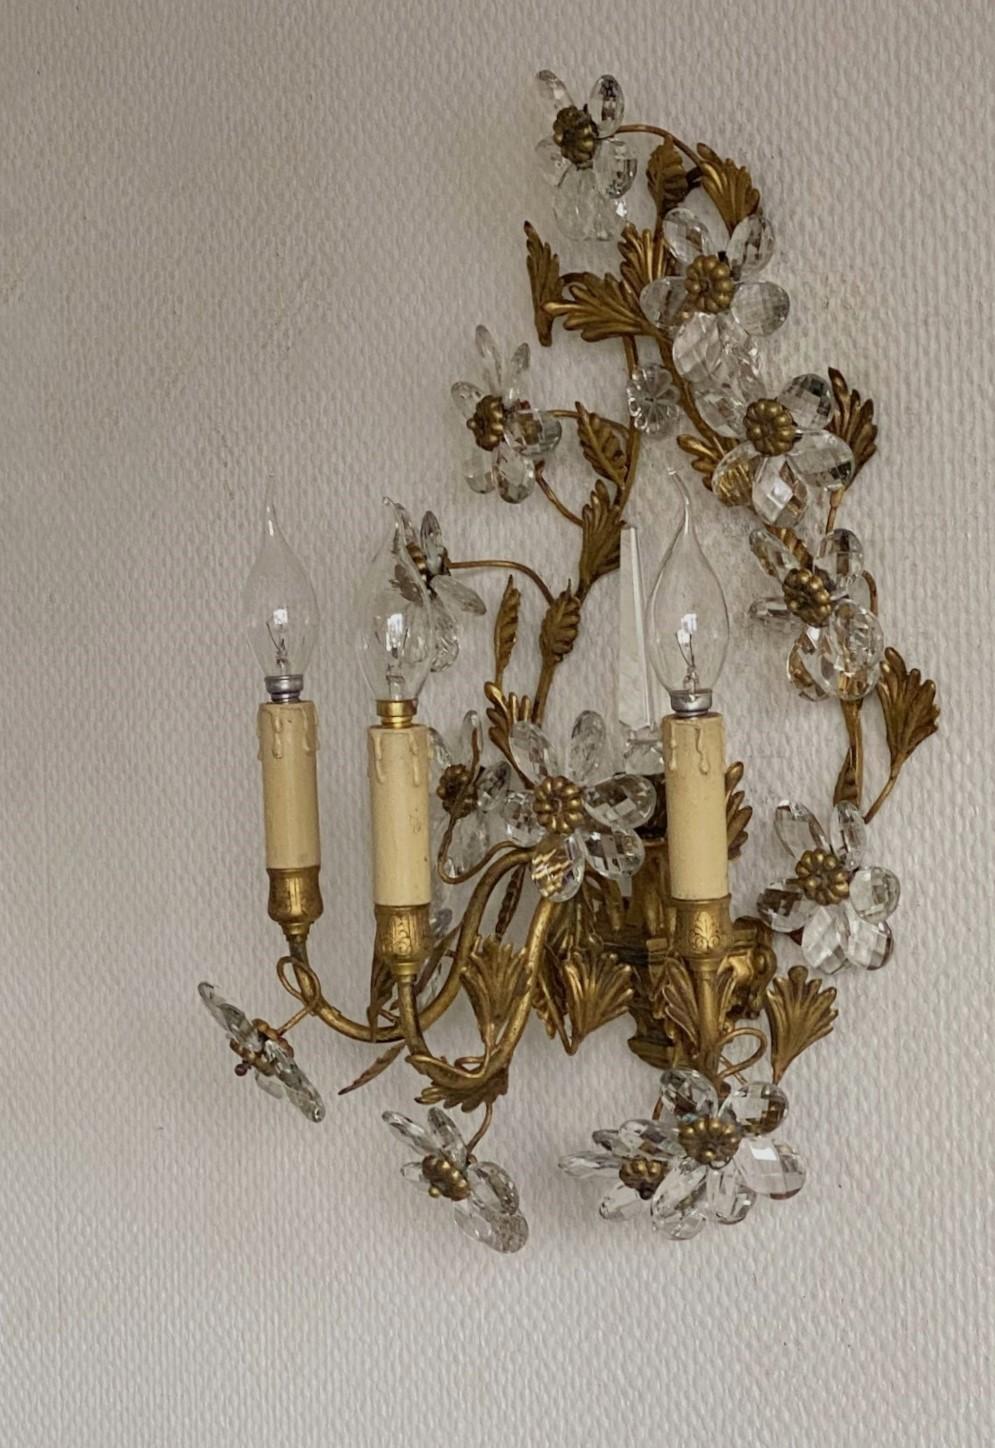 Pair of Large Maison Baguès Wrought Iron Crystal Flower Wall Sconces, 1930s For Sale 1